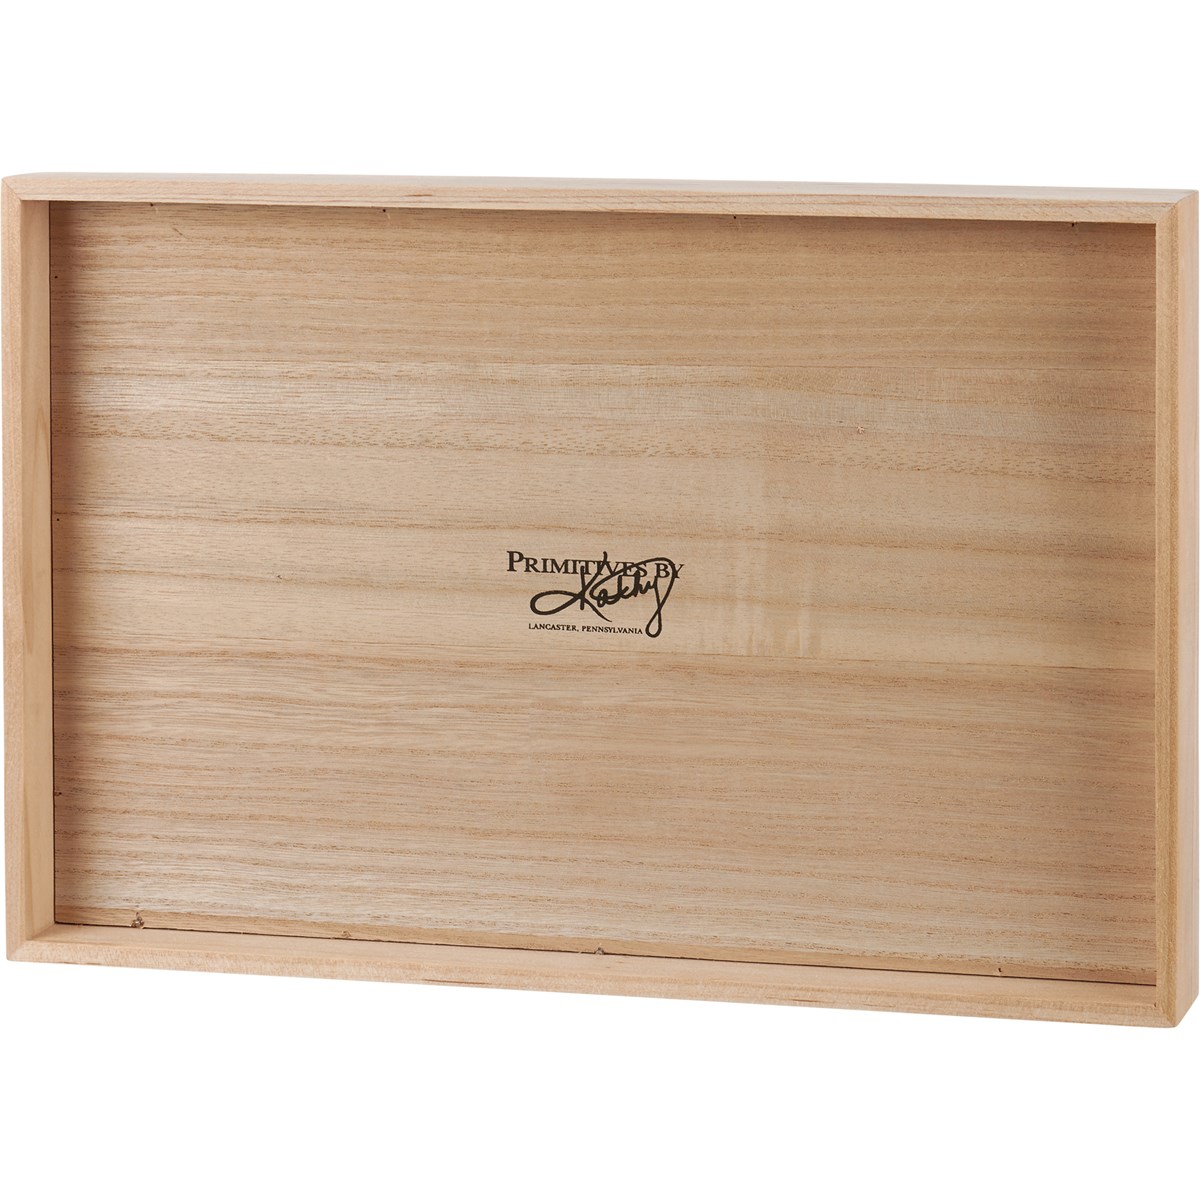 Bicycle Meeting Inset Box Sign - Wood, Paper